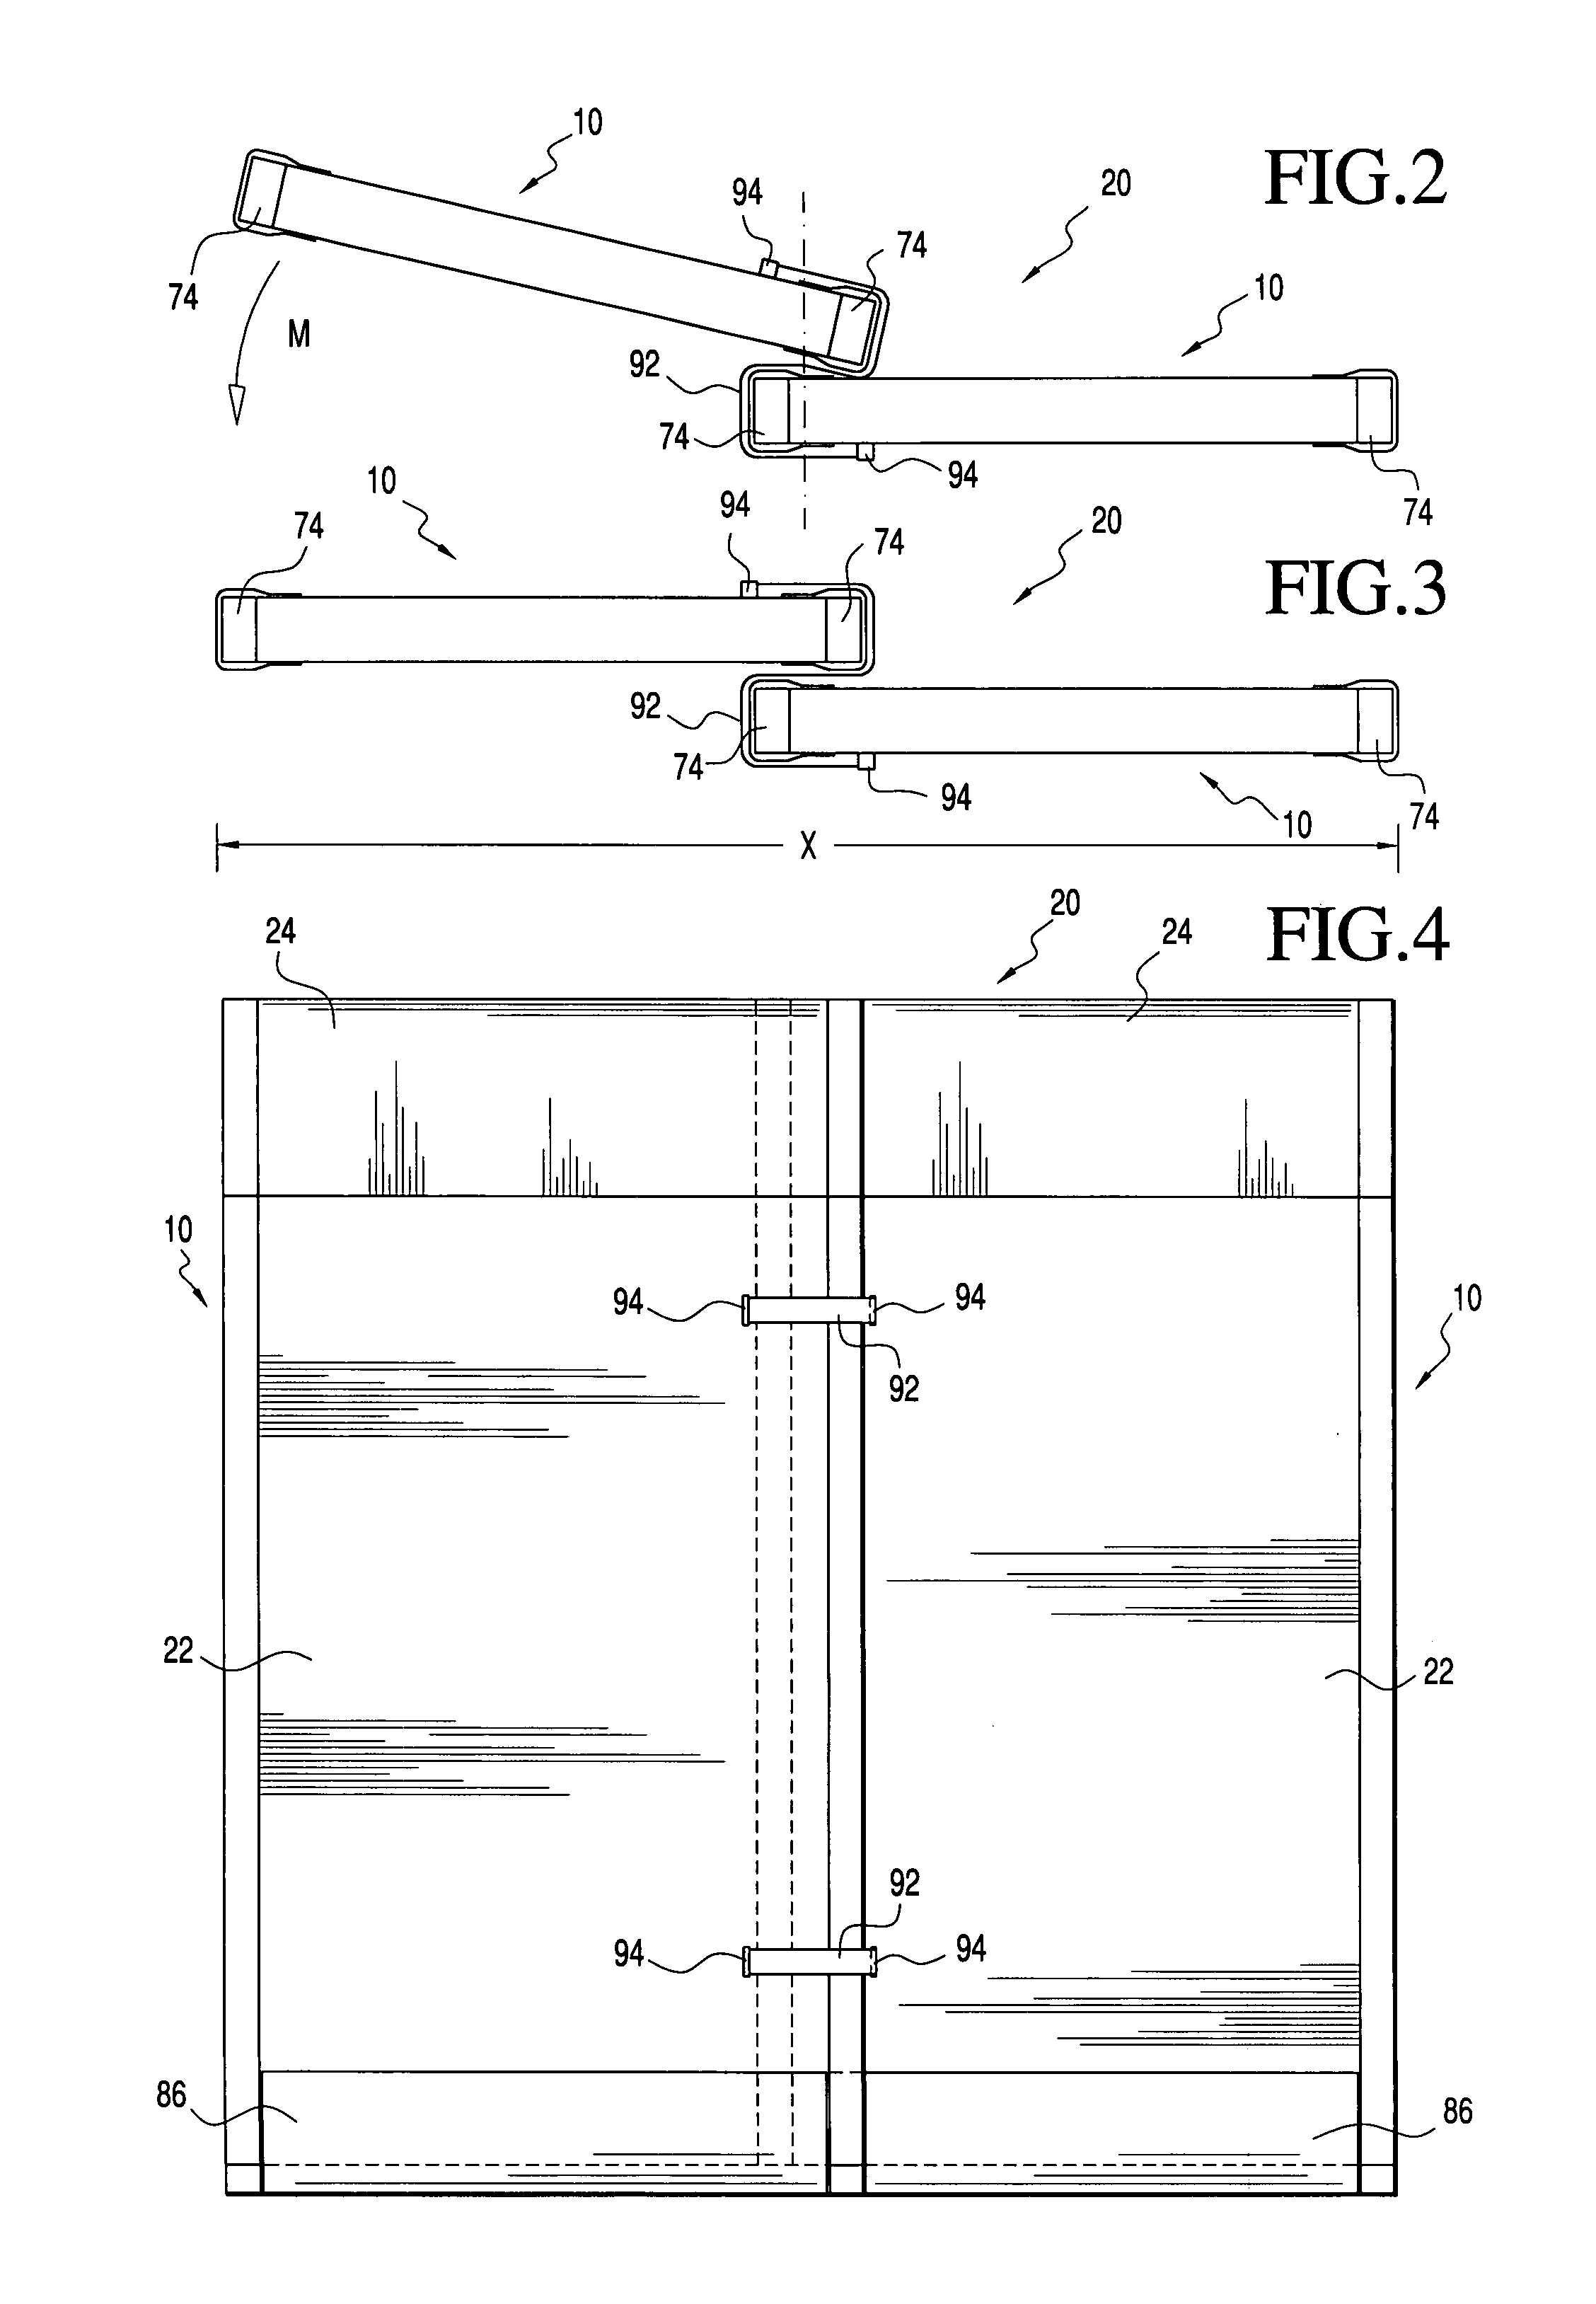 Expandable/contractible universal thermal bulkhead structure for use within refrigerated cargo containers